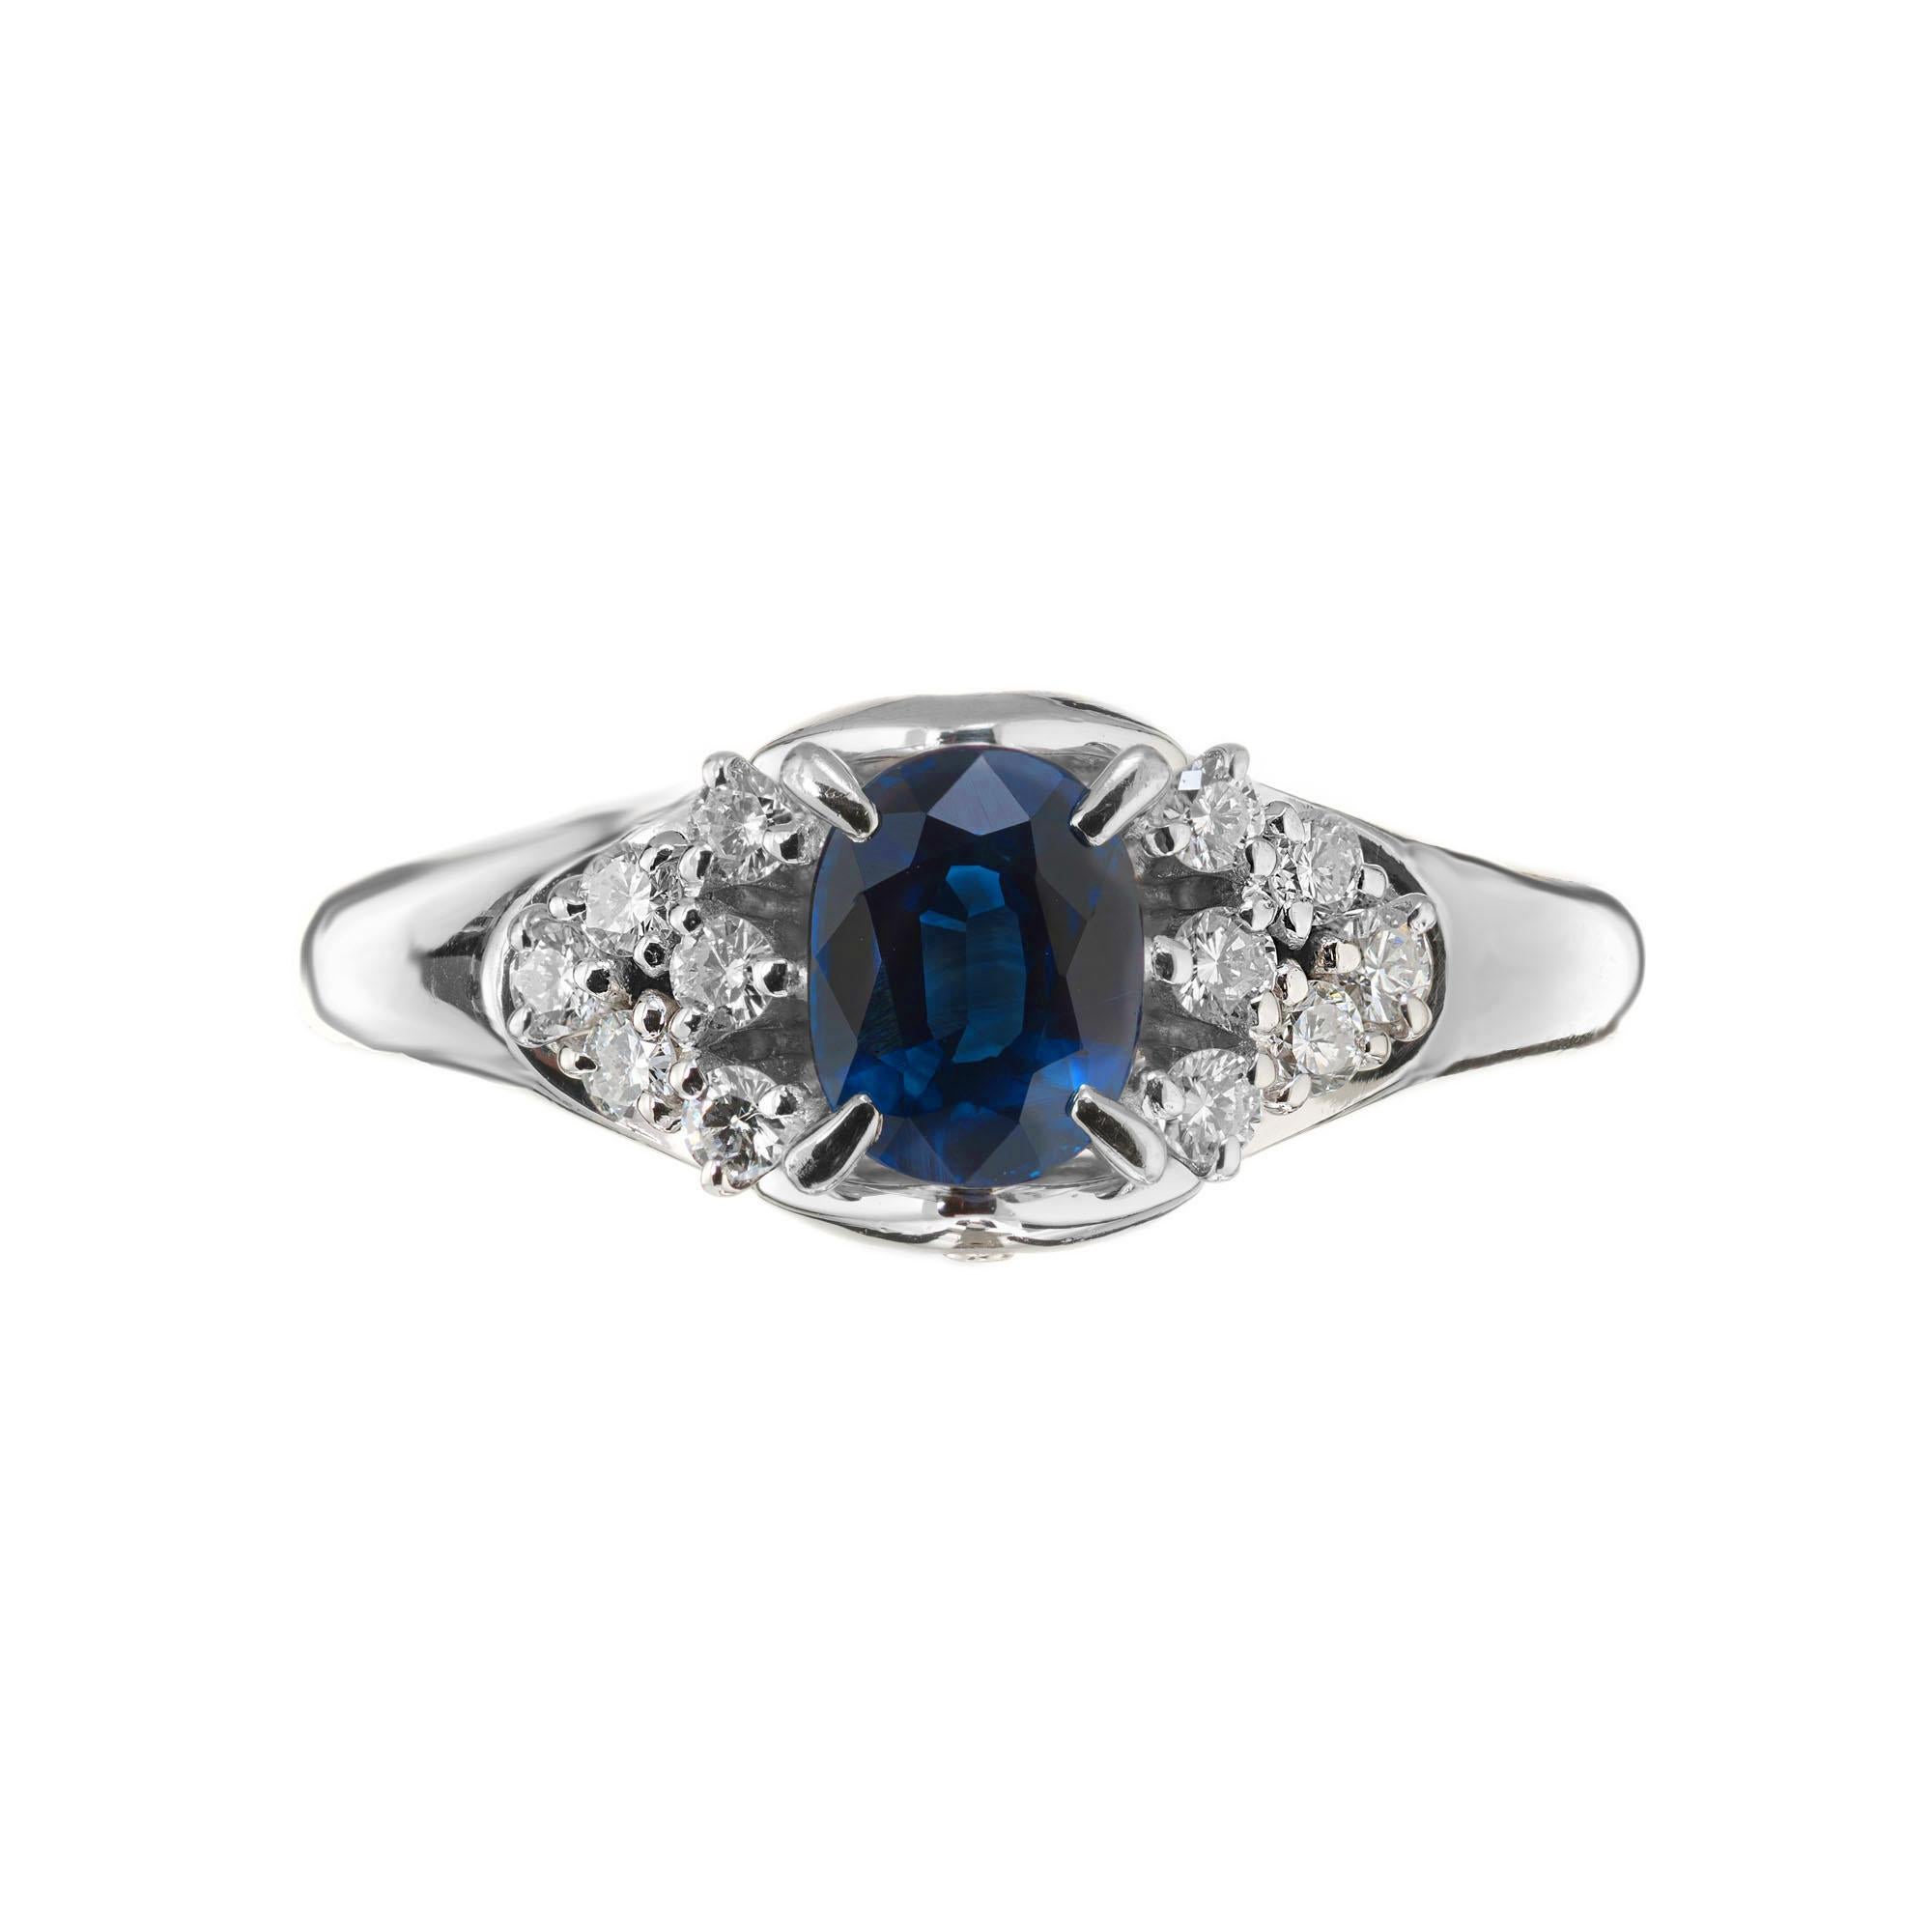 Diamond and sapphire engagement ring. GIA Certified natural no heat oval .79 carat sapphire center stone in a platinum setting with 12 round accent diamonds in platinum setting. 

1 oval blue sapphire, SI approx. .79cts GIA Certificate #